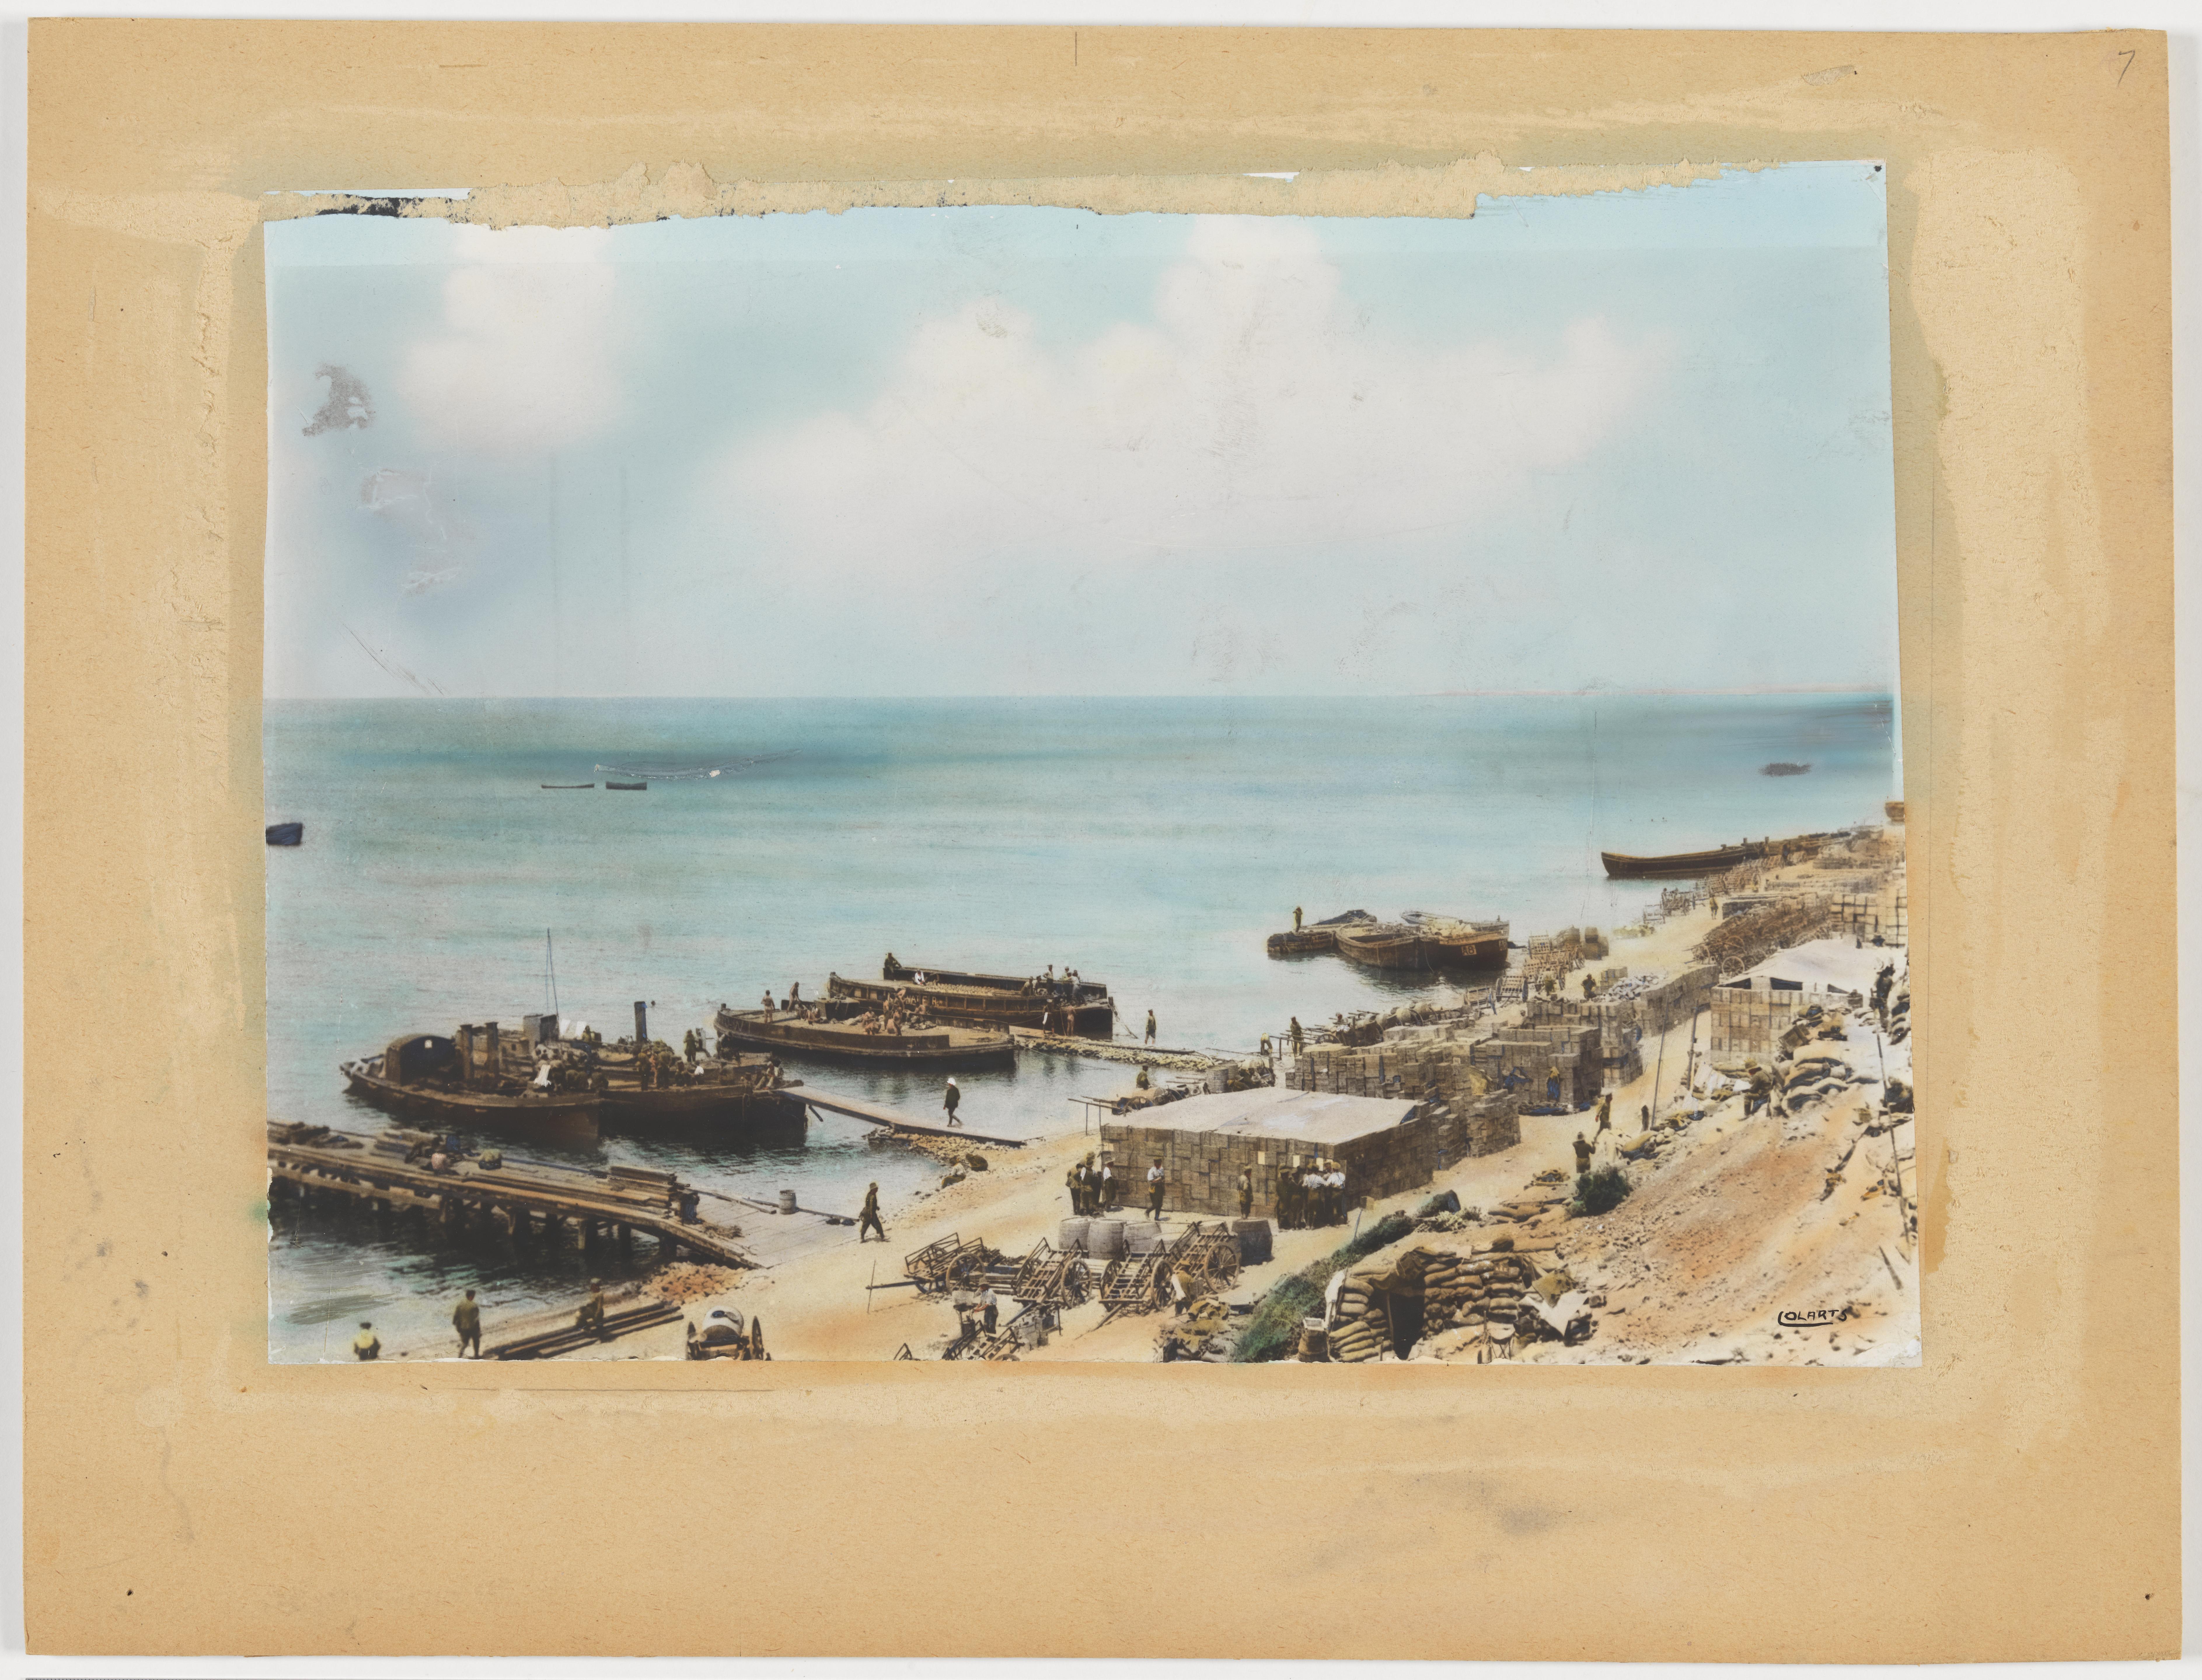 North Beach | Hand-coloured war photograph | Colart's Studios, Melbourne, c. 1920s | State Library of New South Wales